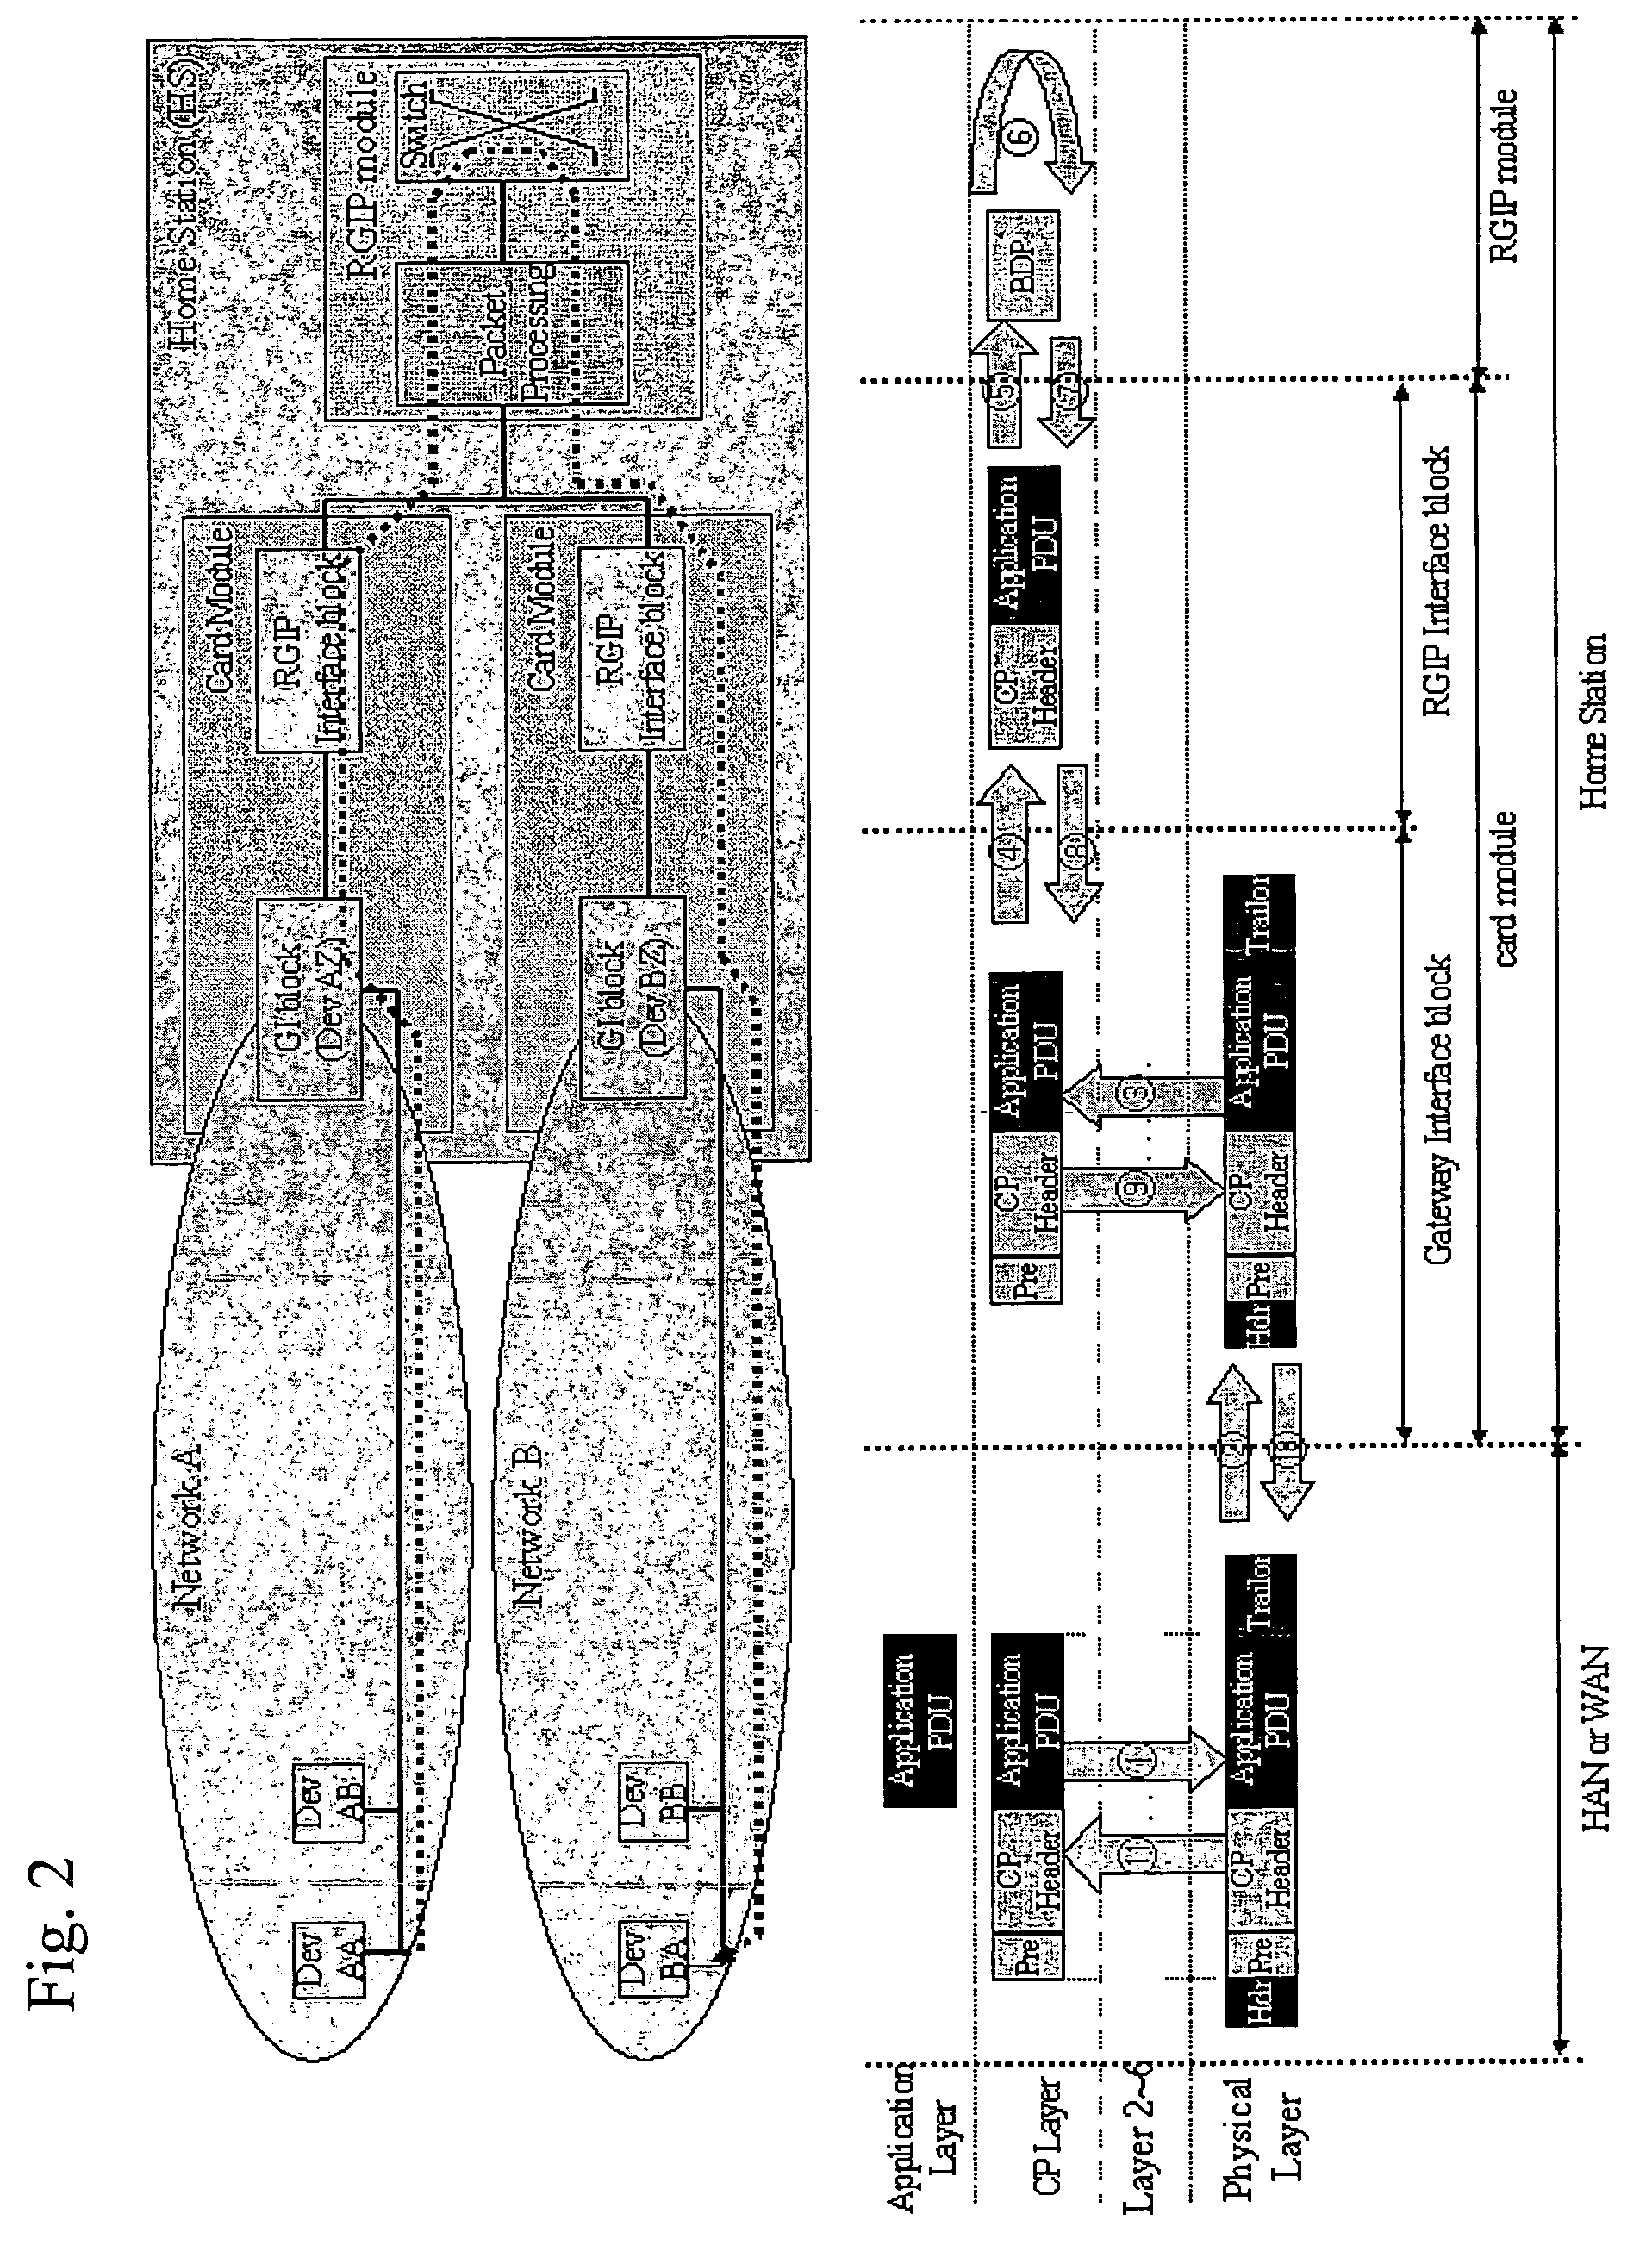 Common protocol layer architecture and methods for transmitting data between different network protocols and a common protocol packet